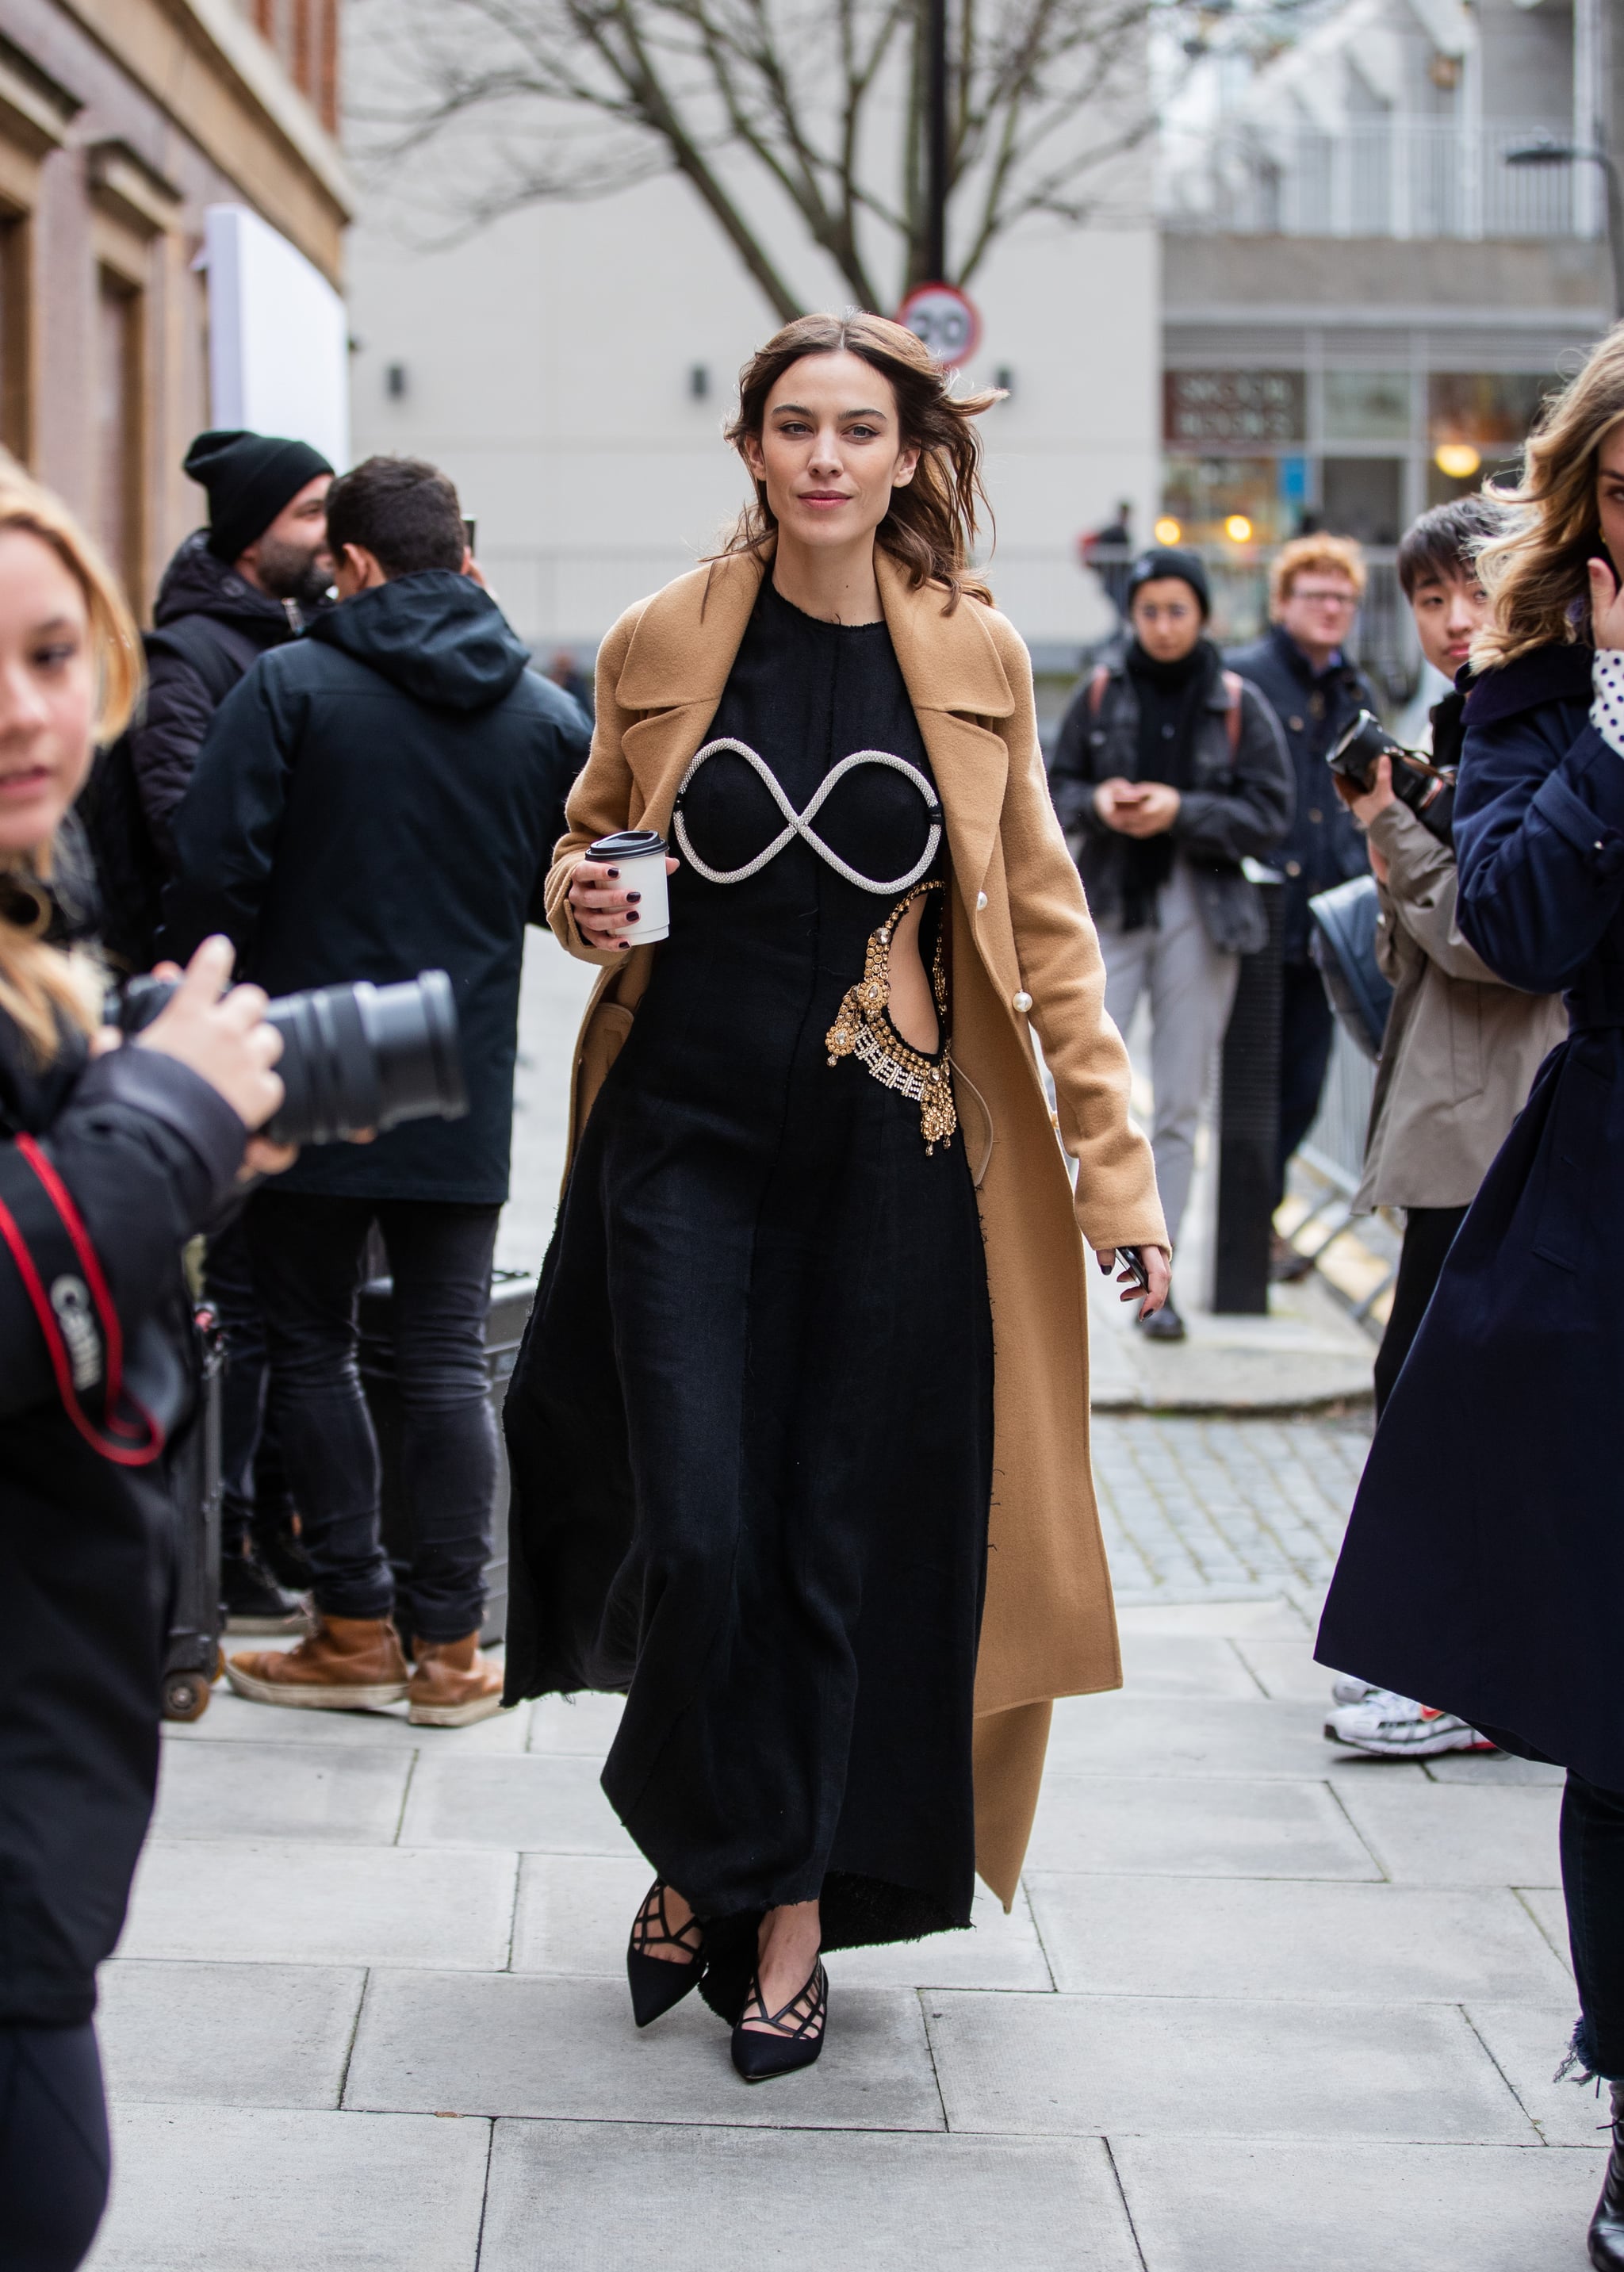 EmRata's chocolate brown leather co-ord is giving us all the